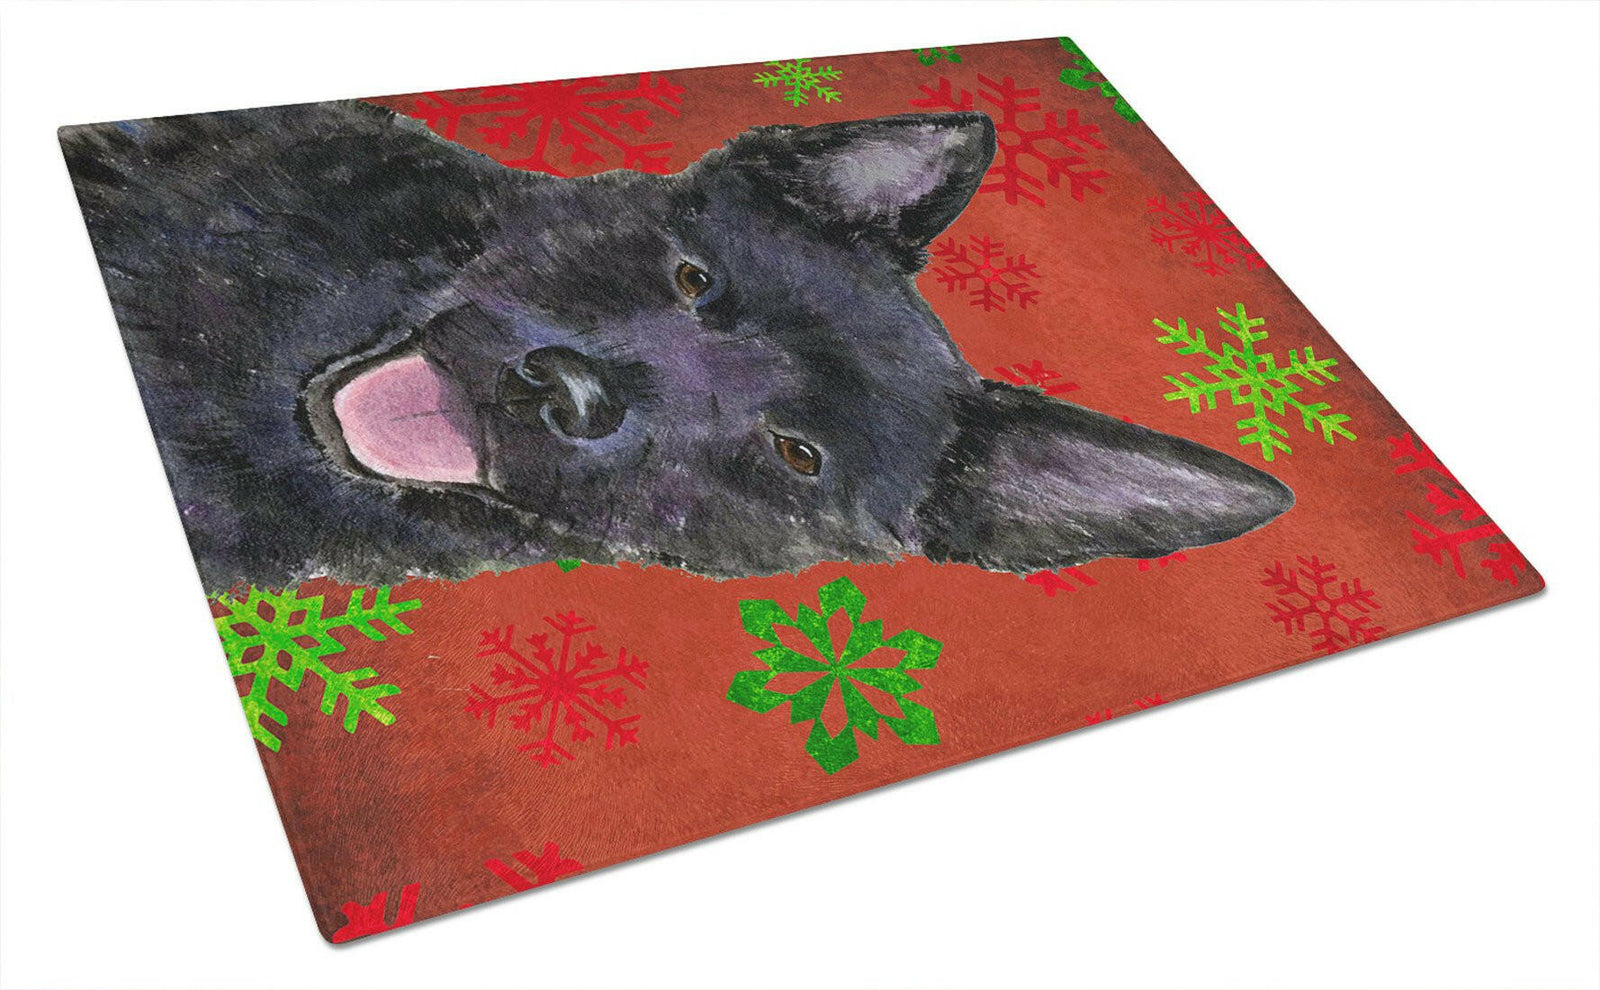 Australian Kelpie Red and Green Snowflakes Christmas Glass Cutting Board Large by Caroline's Treasures